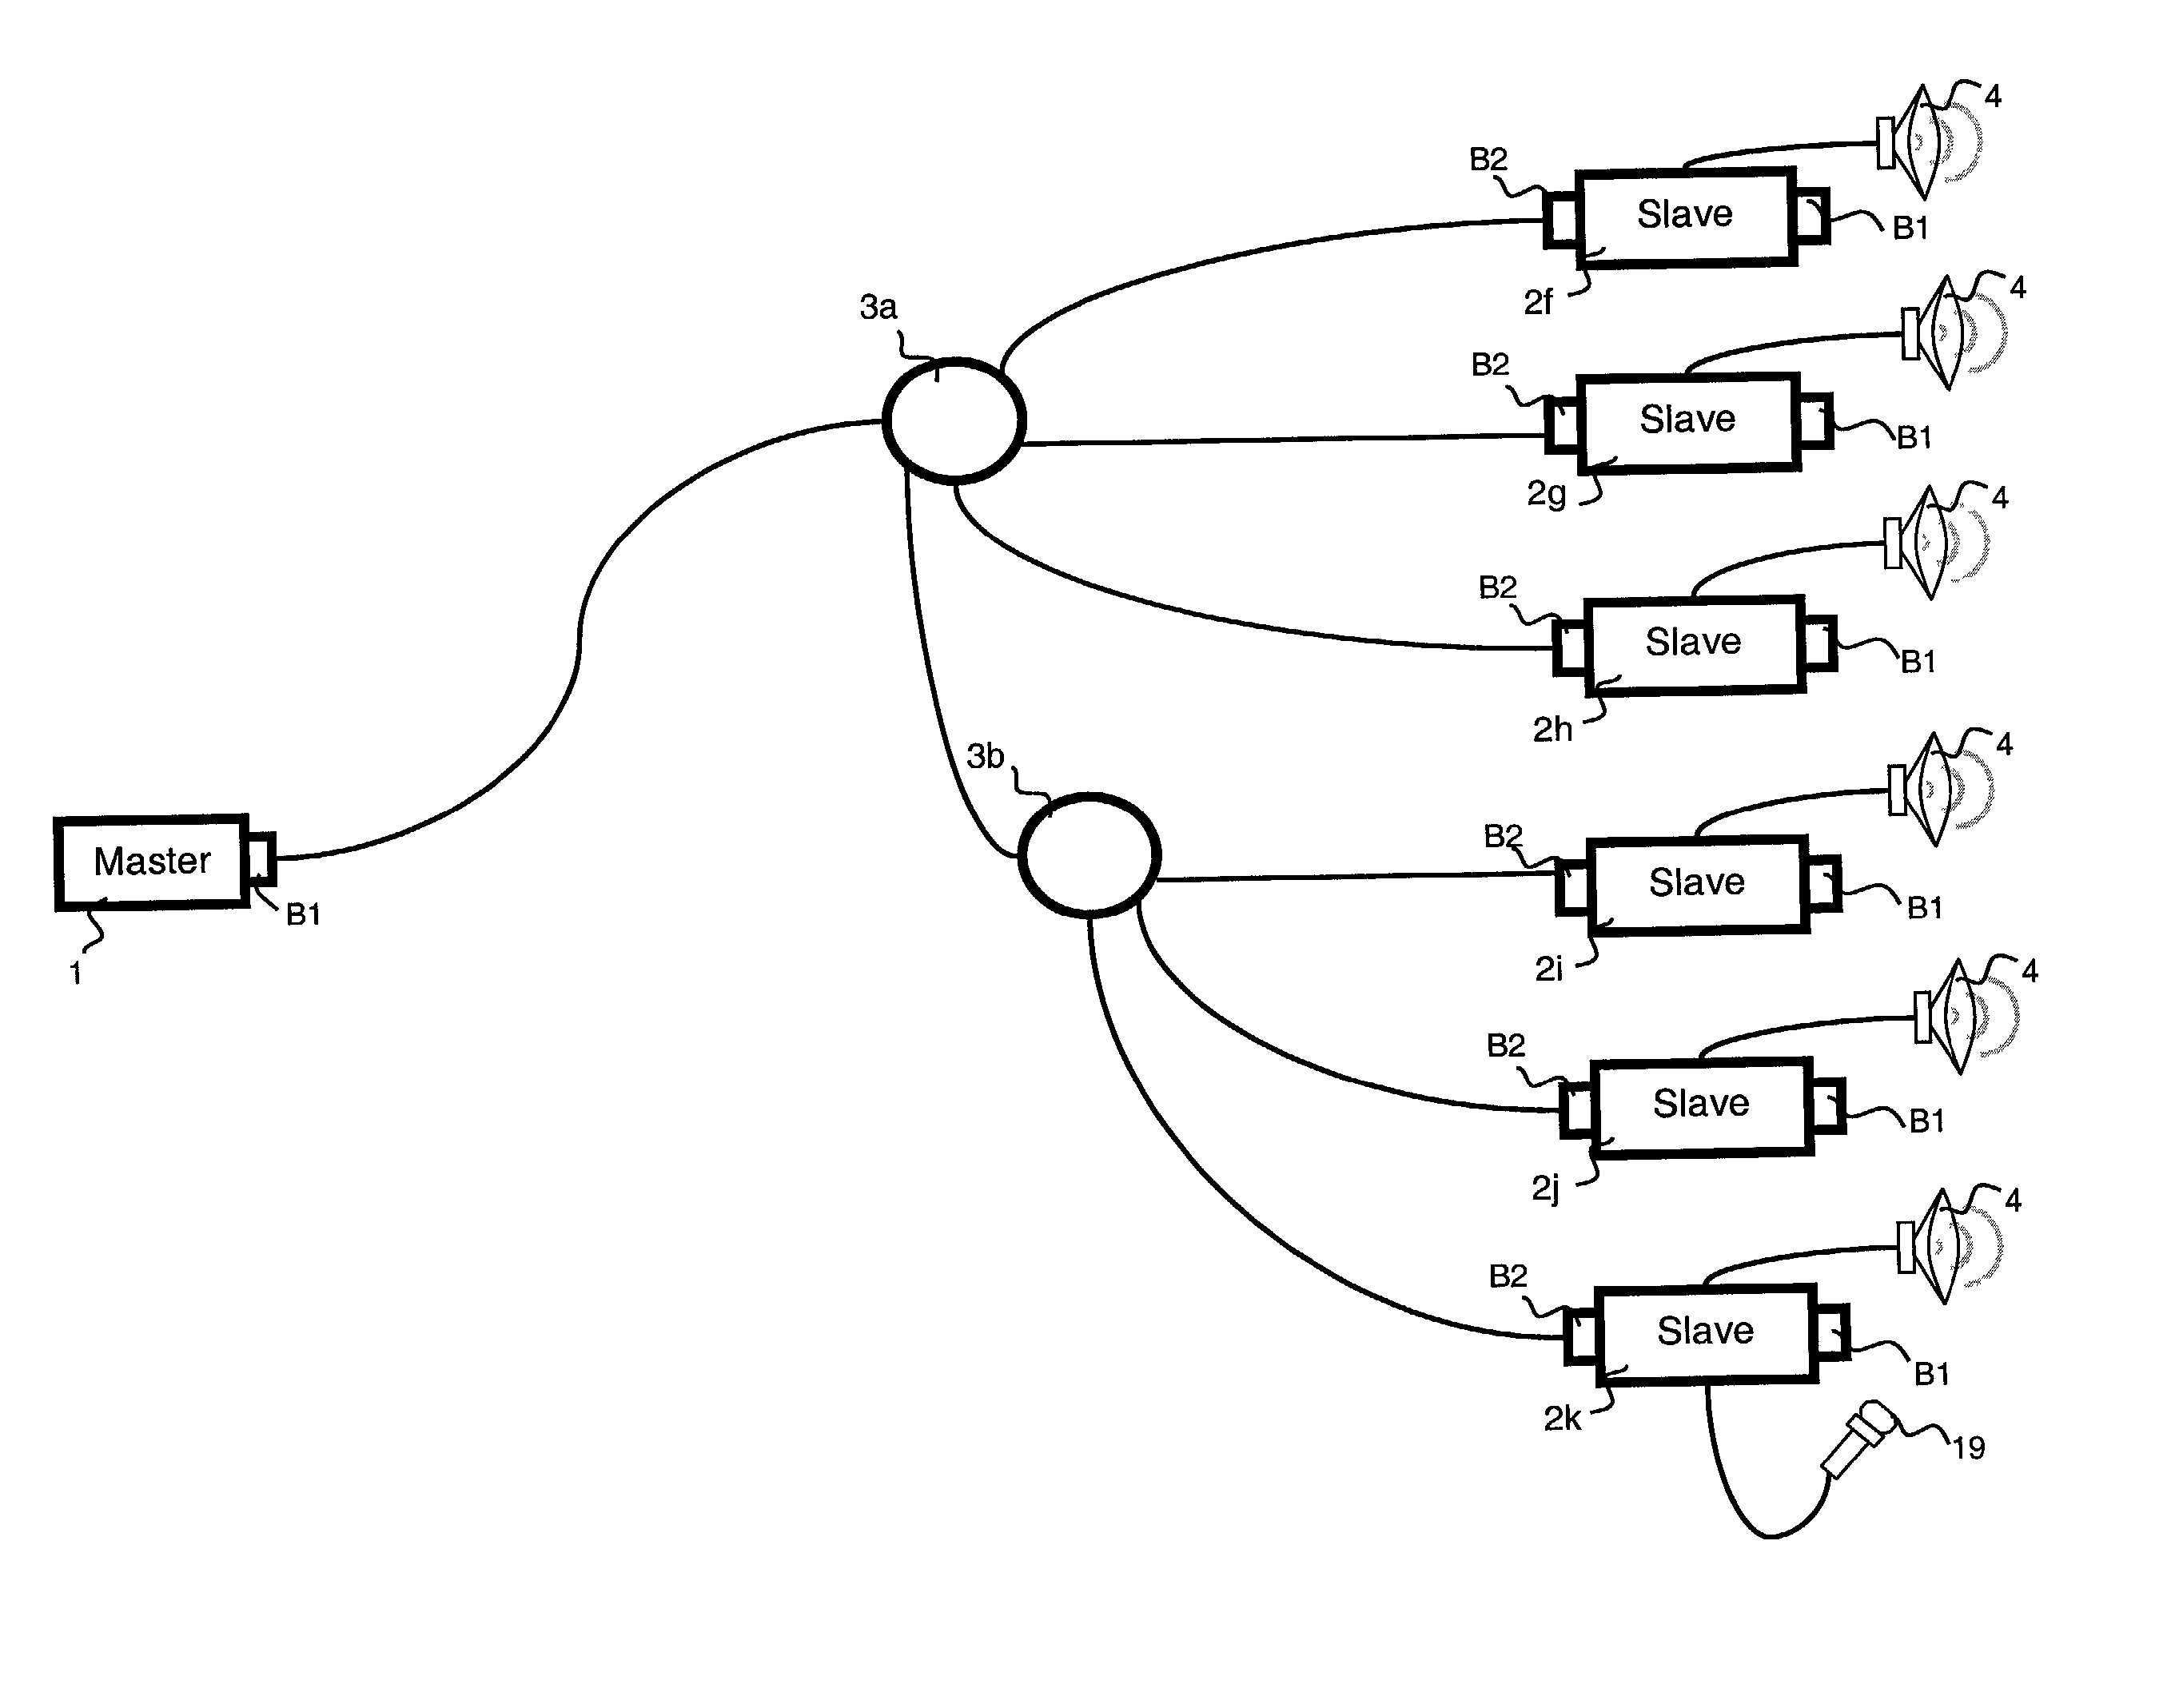 Audio data transmission system between a master module and slave modules by means of a digital communication network